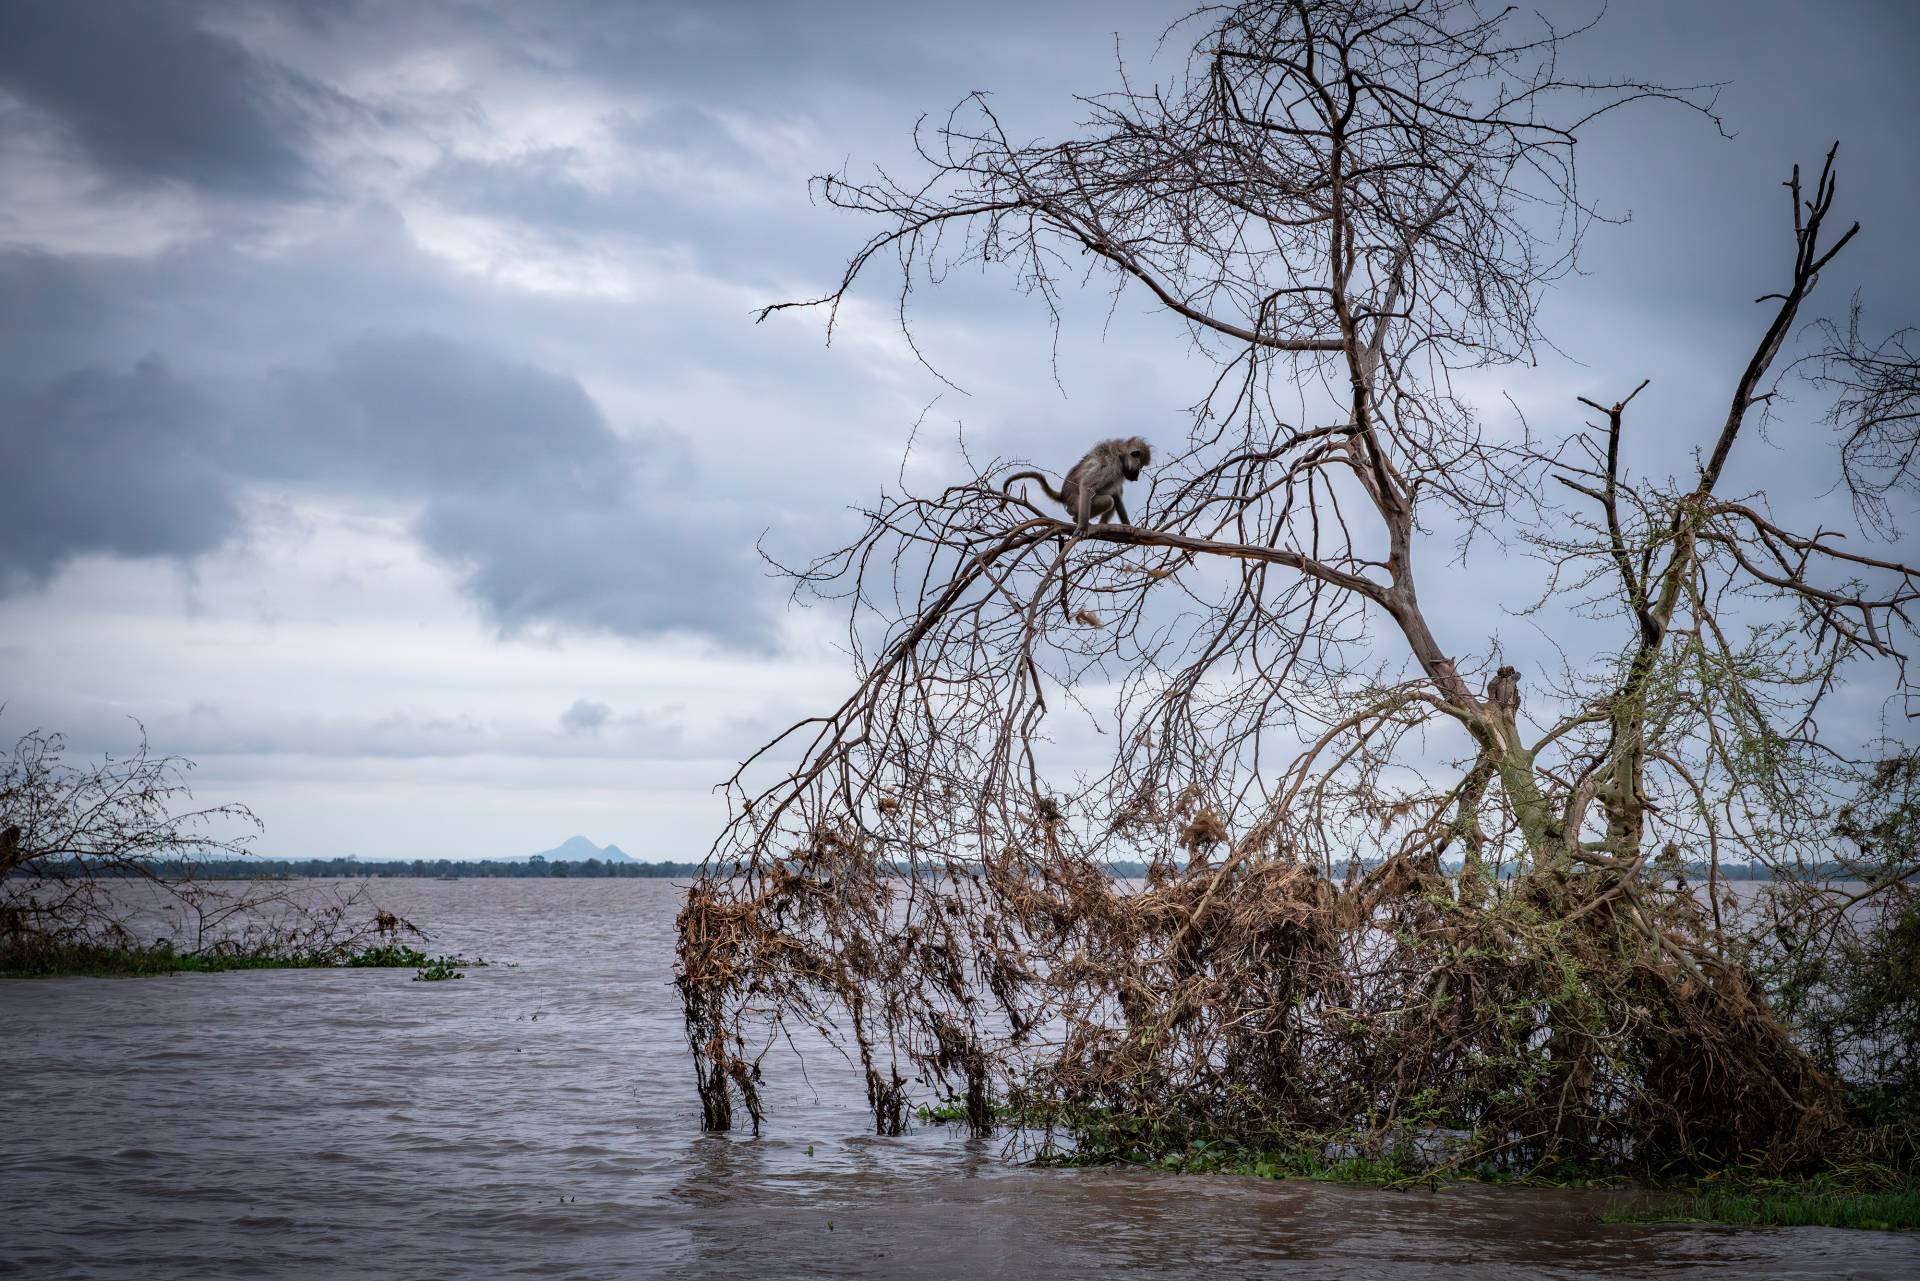 A baboon in a tree during the flooding after cyclone Idai